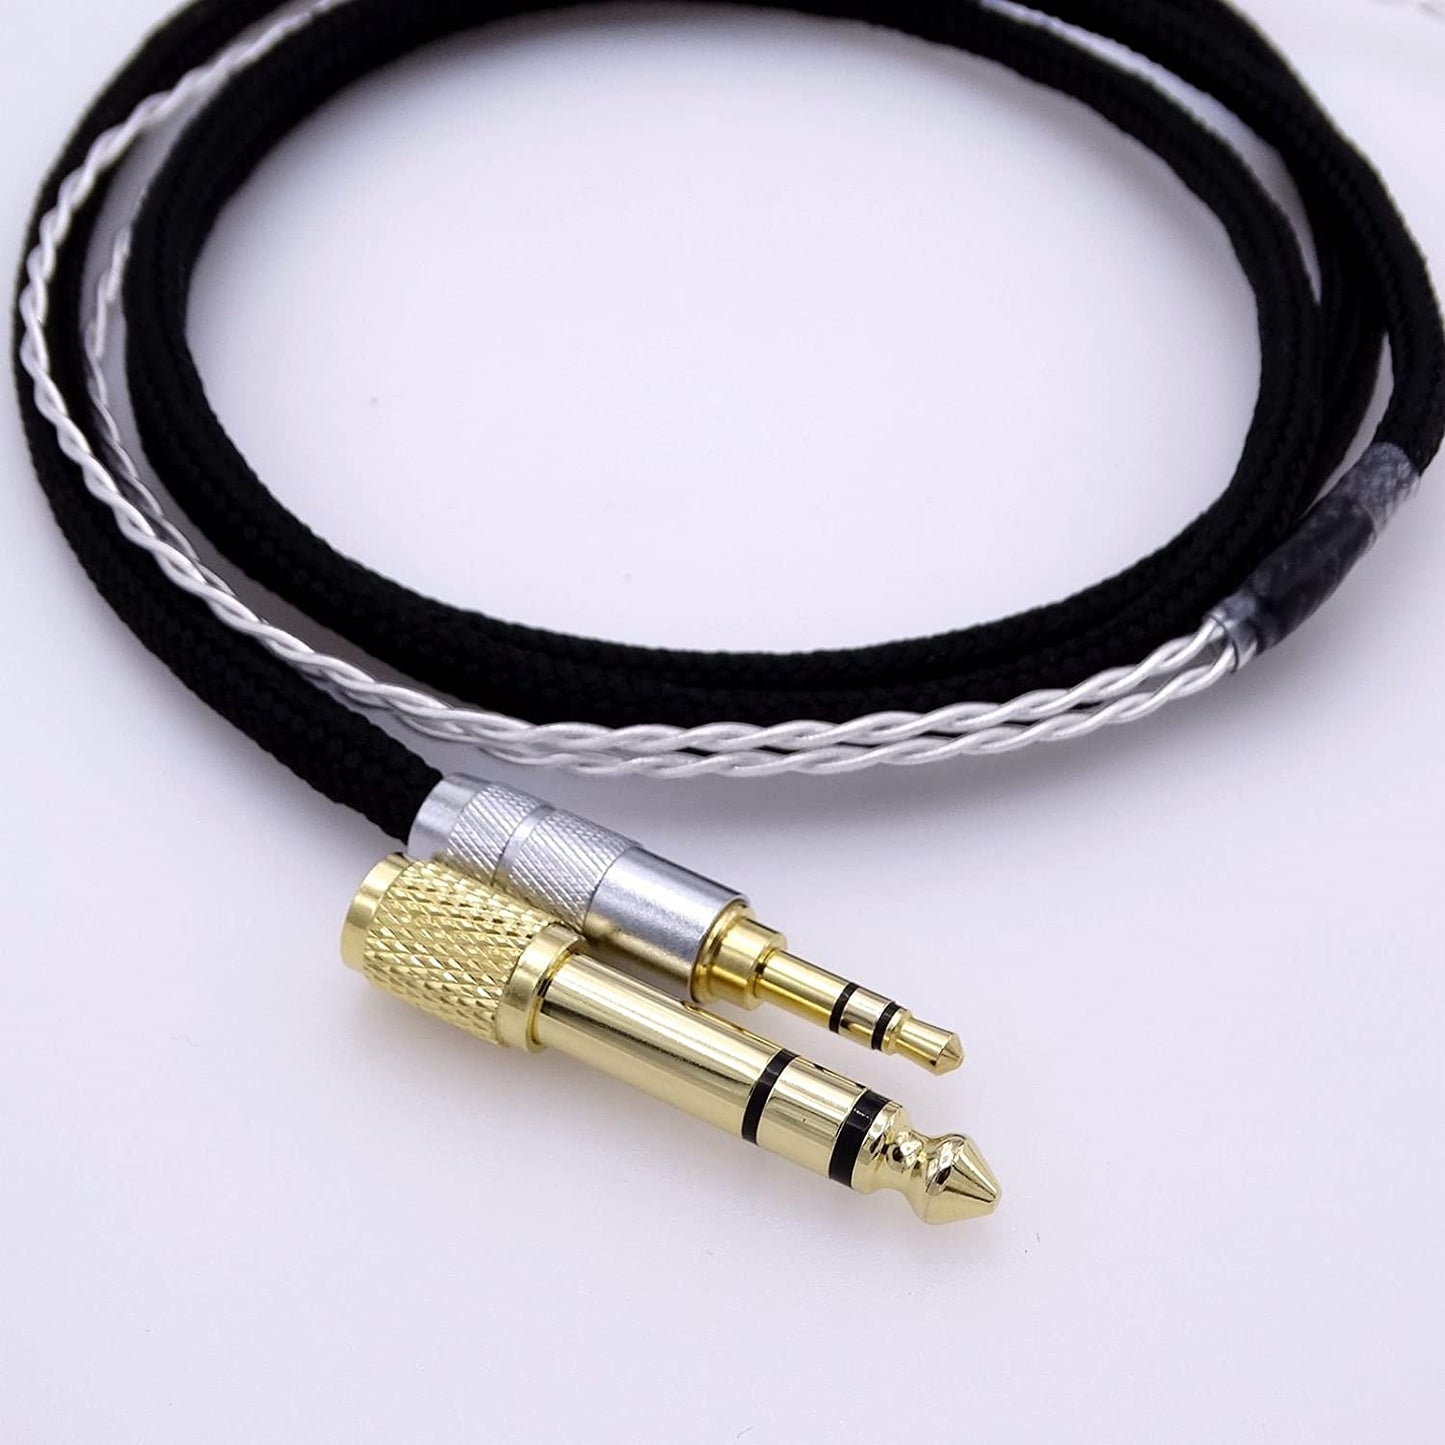 GAGACOCC Black 1.2m (4FT) 5N OCC Silver Plated Hi-End HiFi Headphone Upgrade Cable for Hifman HE1000 HE400S He400i HE560 HE-X Oppo PM-1 PM-2